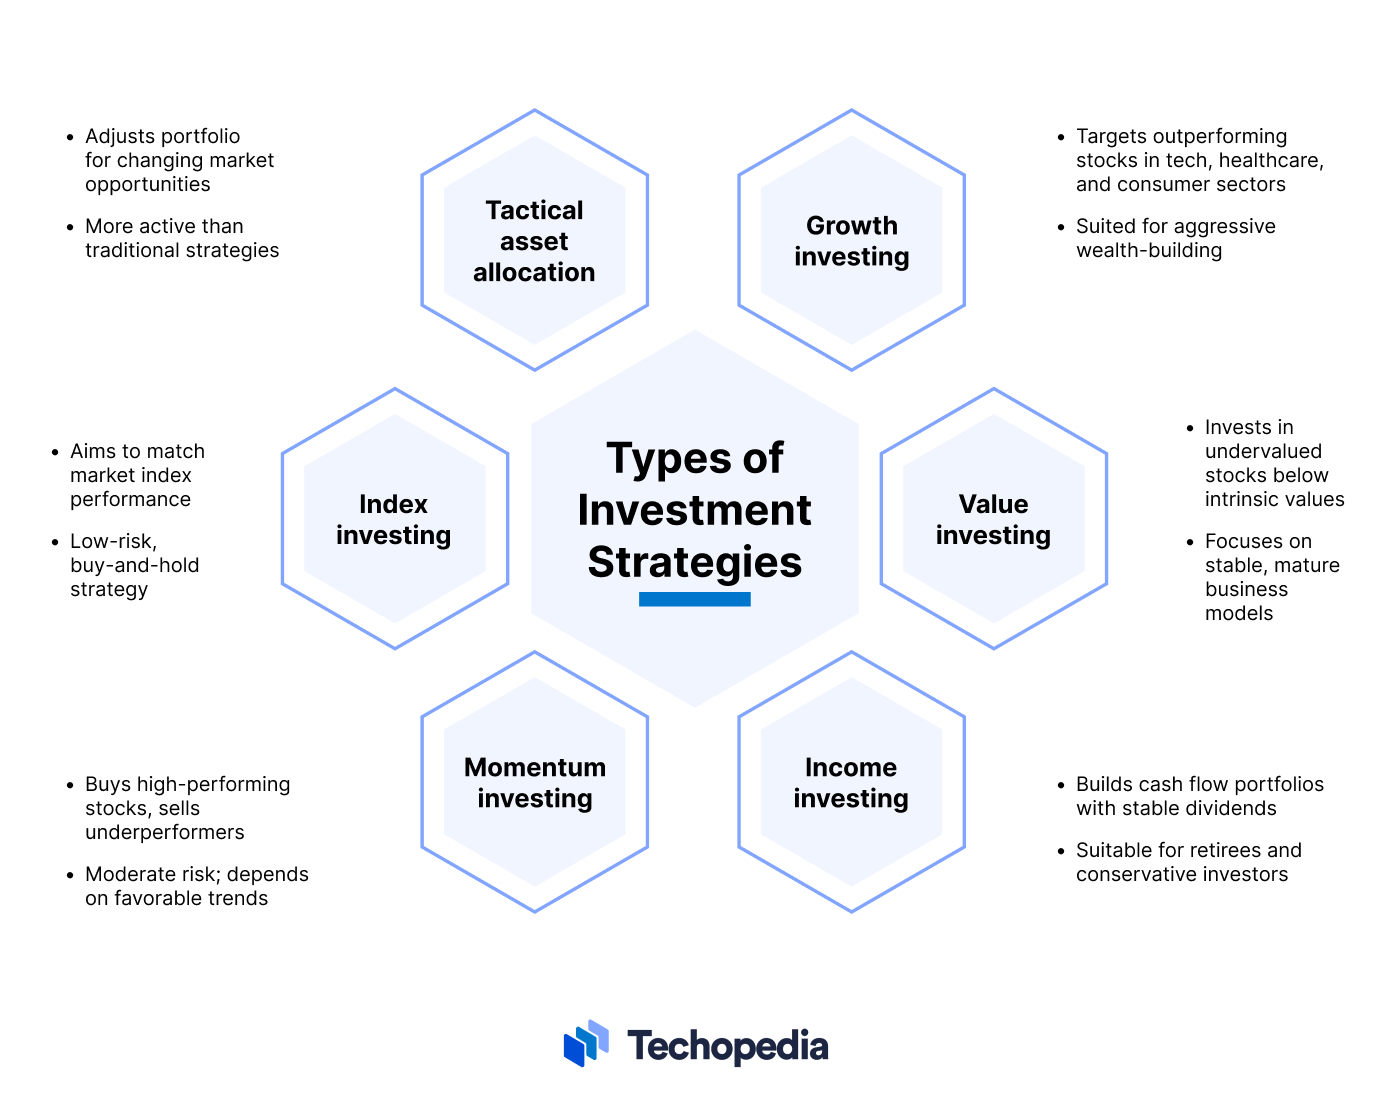 Types of Investment Strategies